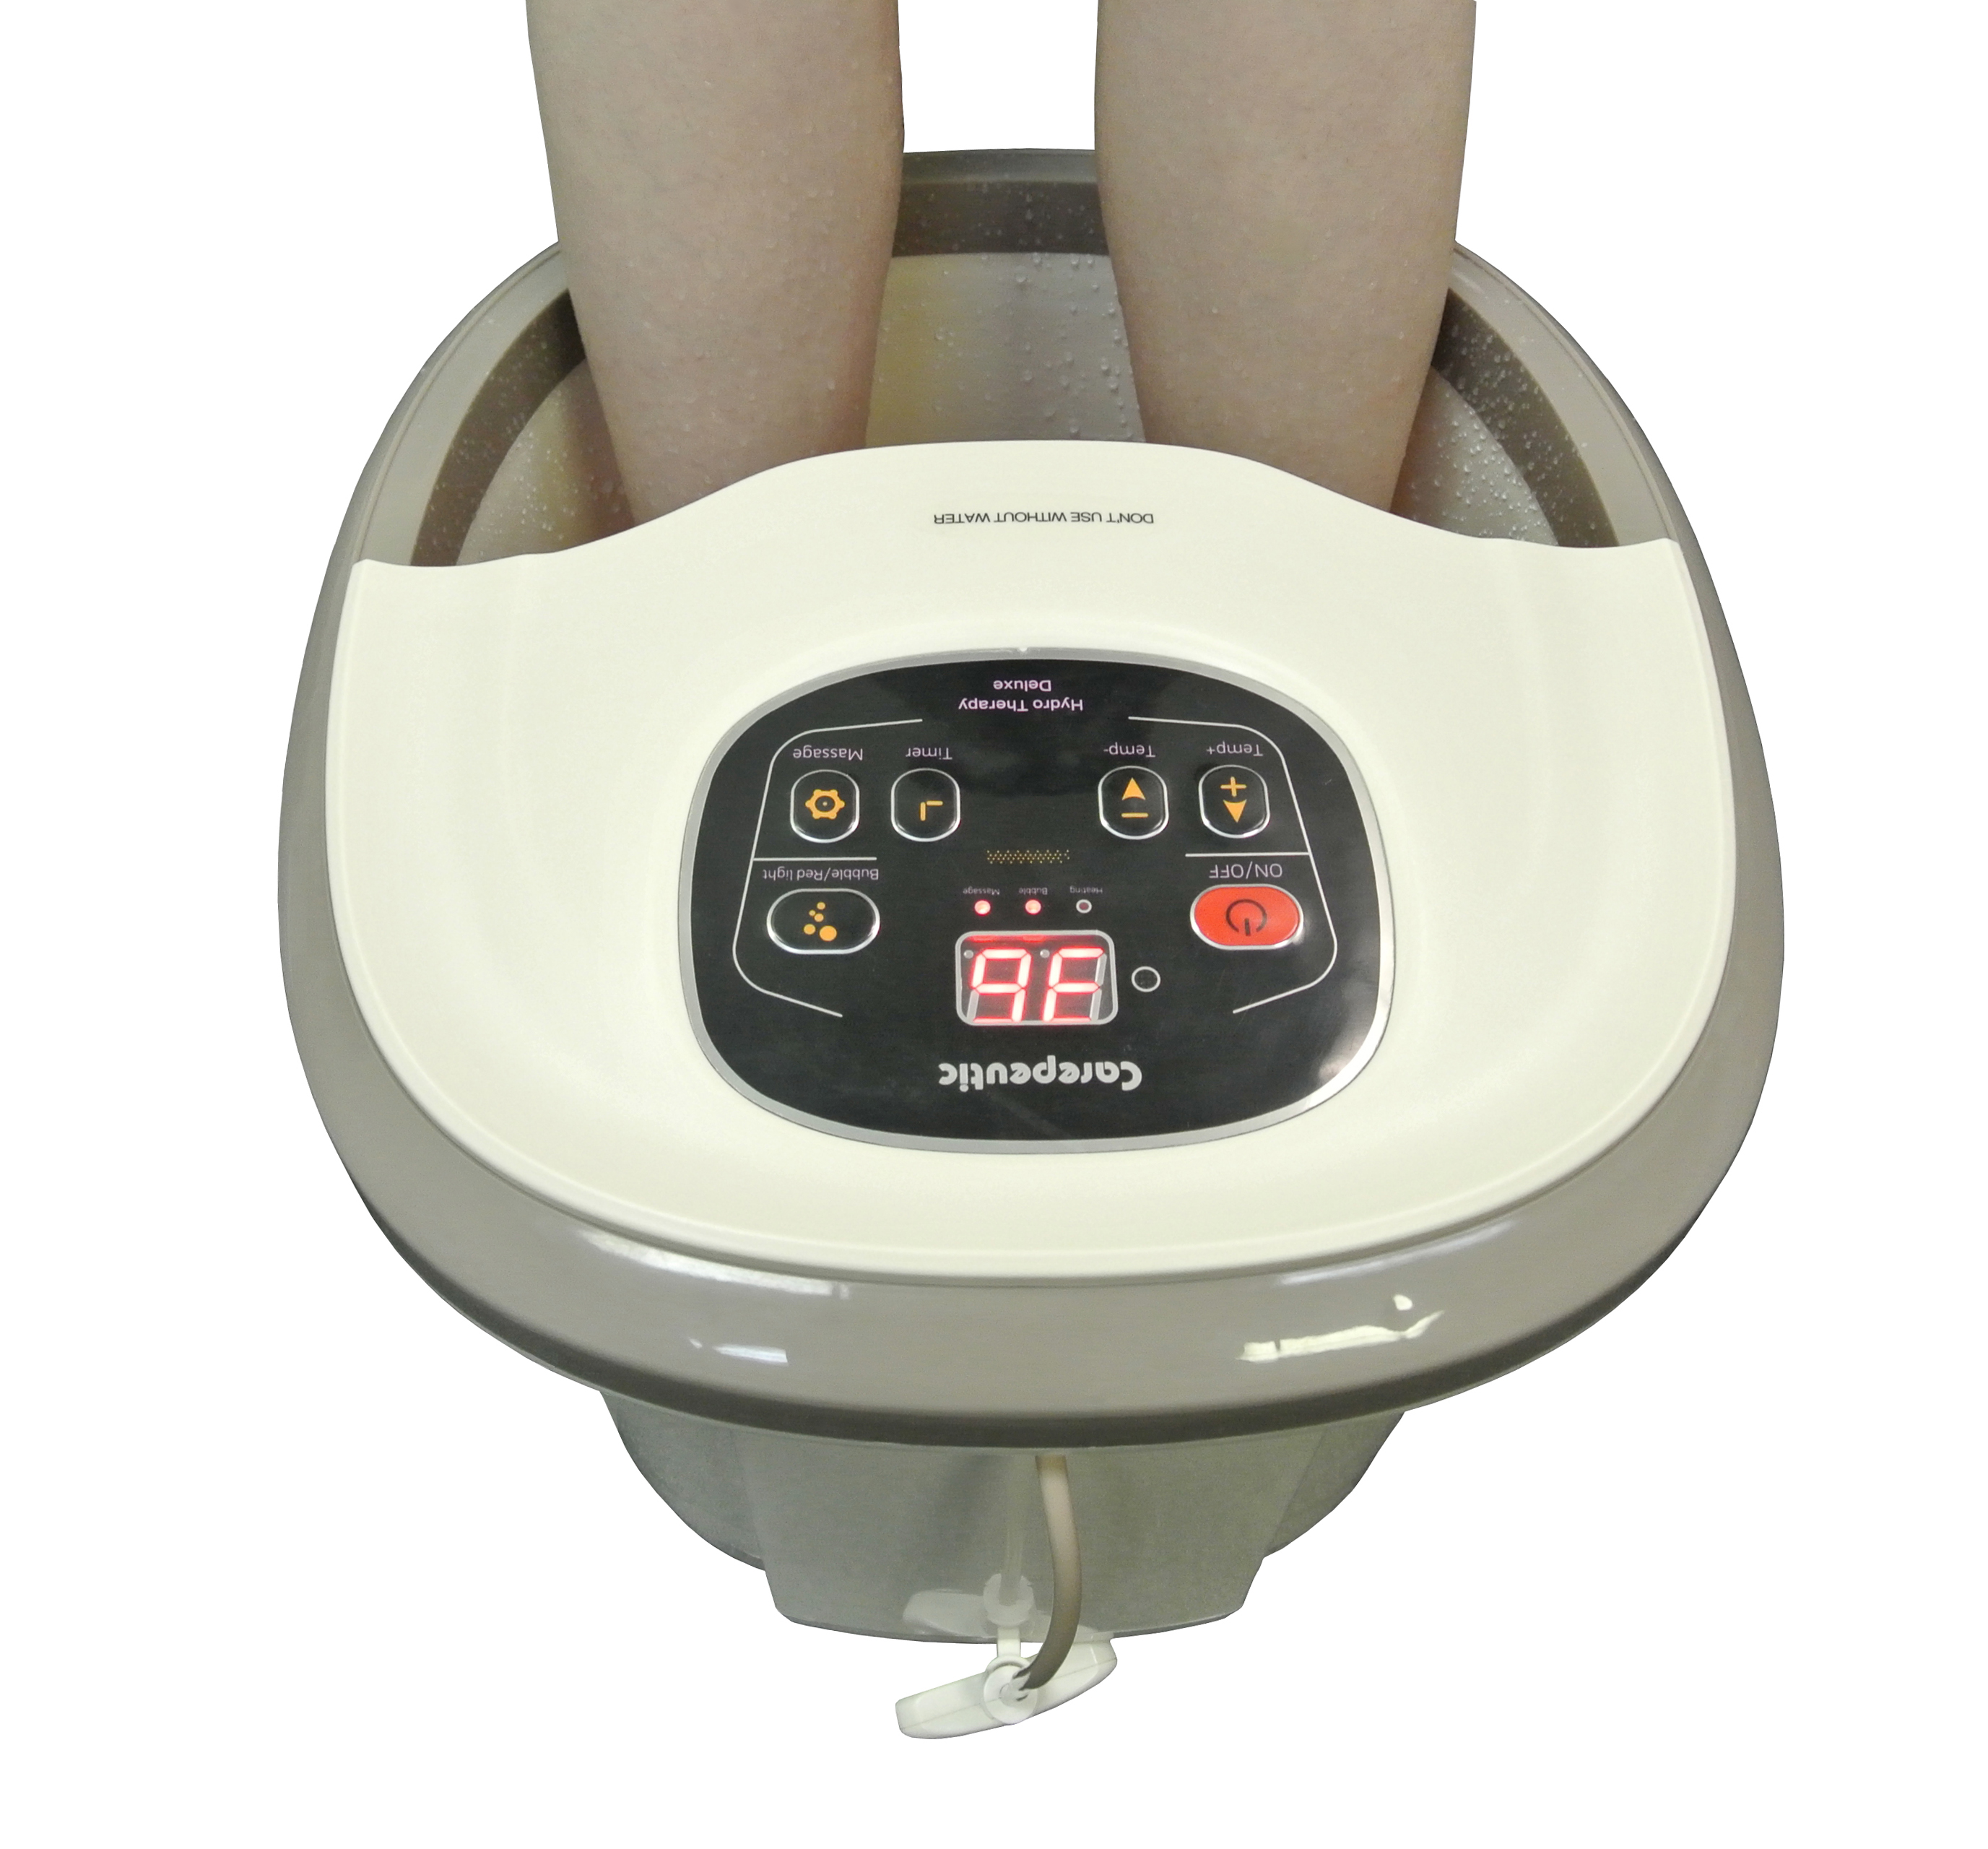 Picture of Carepeutic KH301 Motorized Hydro Therapy Foot & Leg Spa Bath Massager